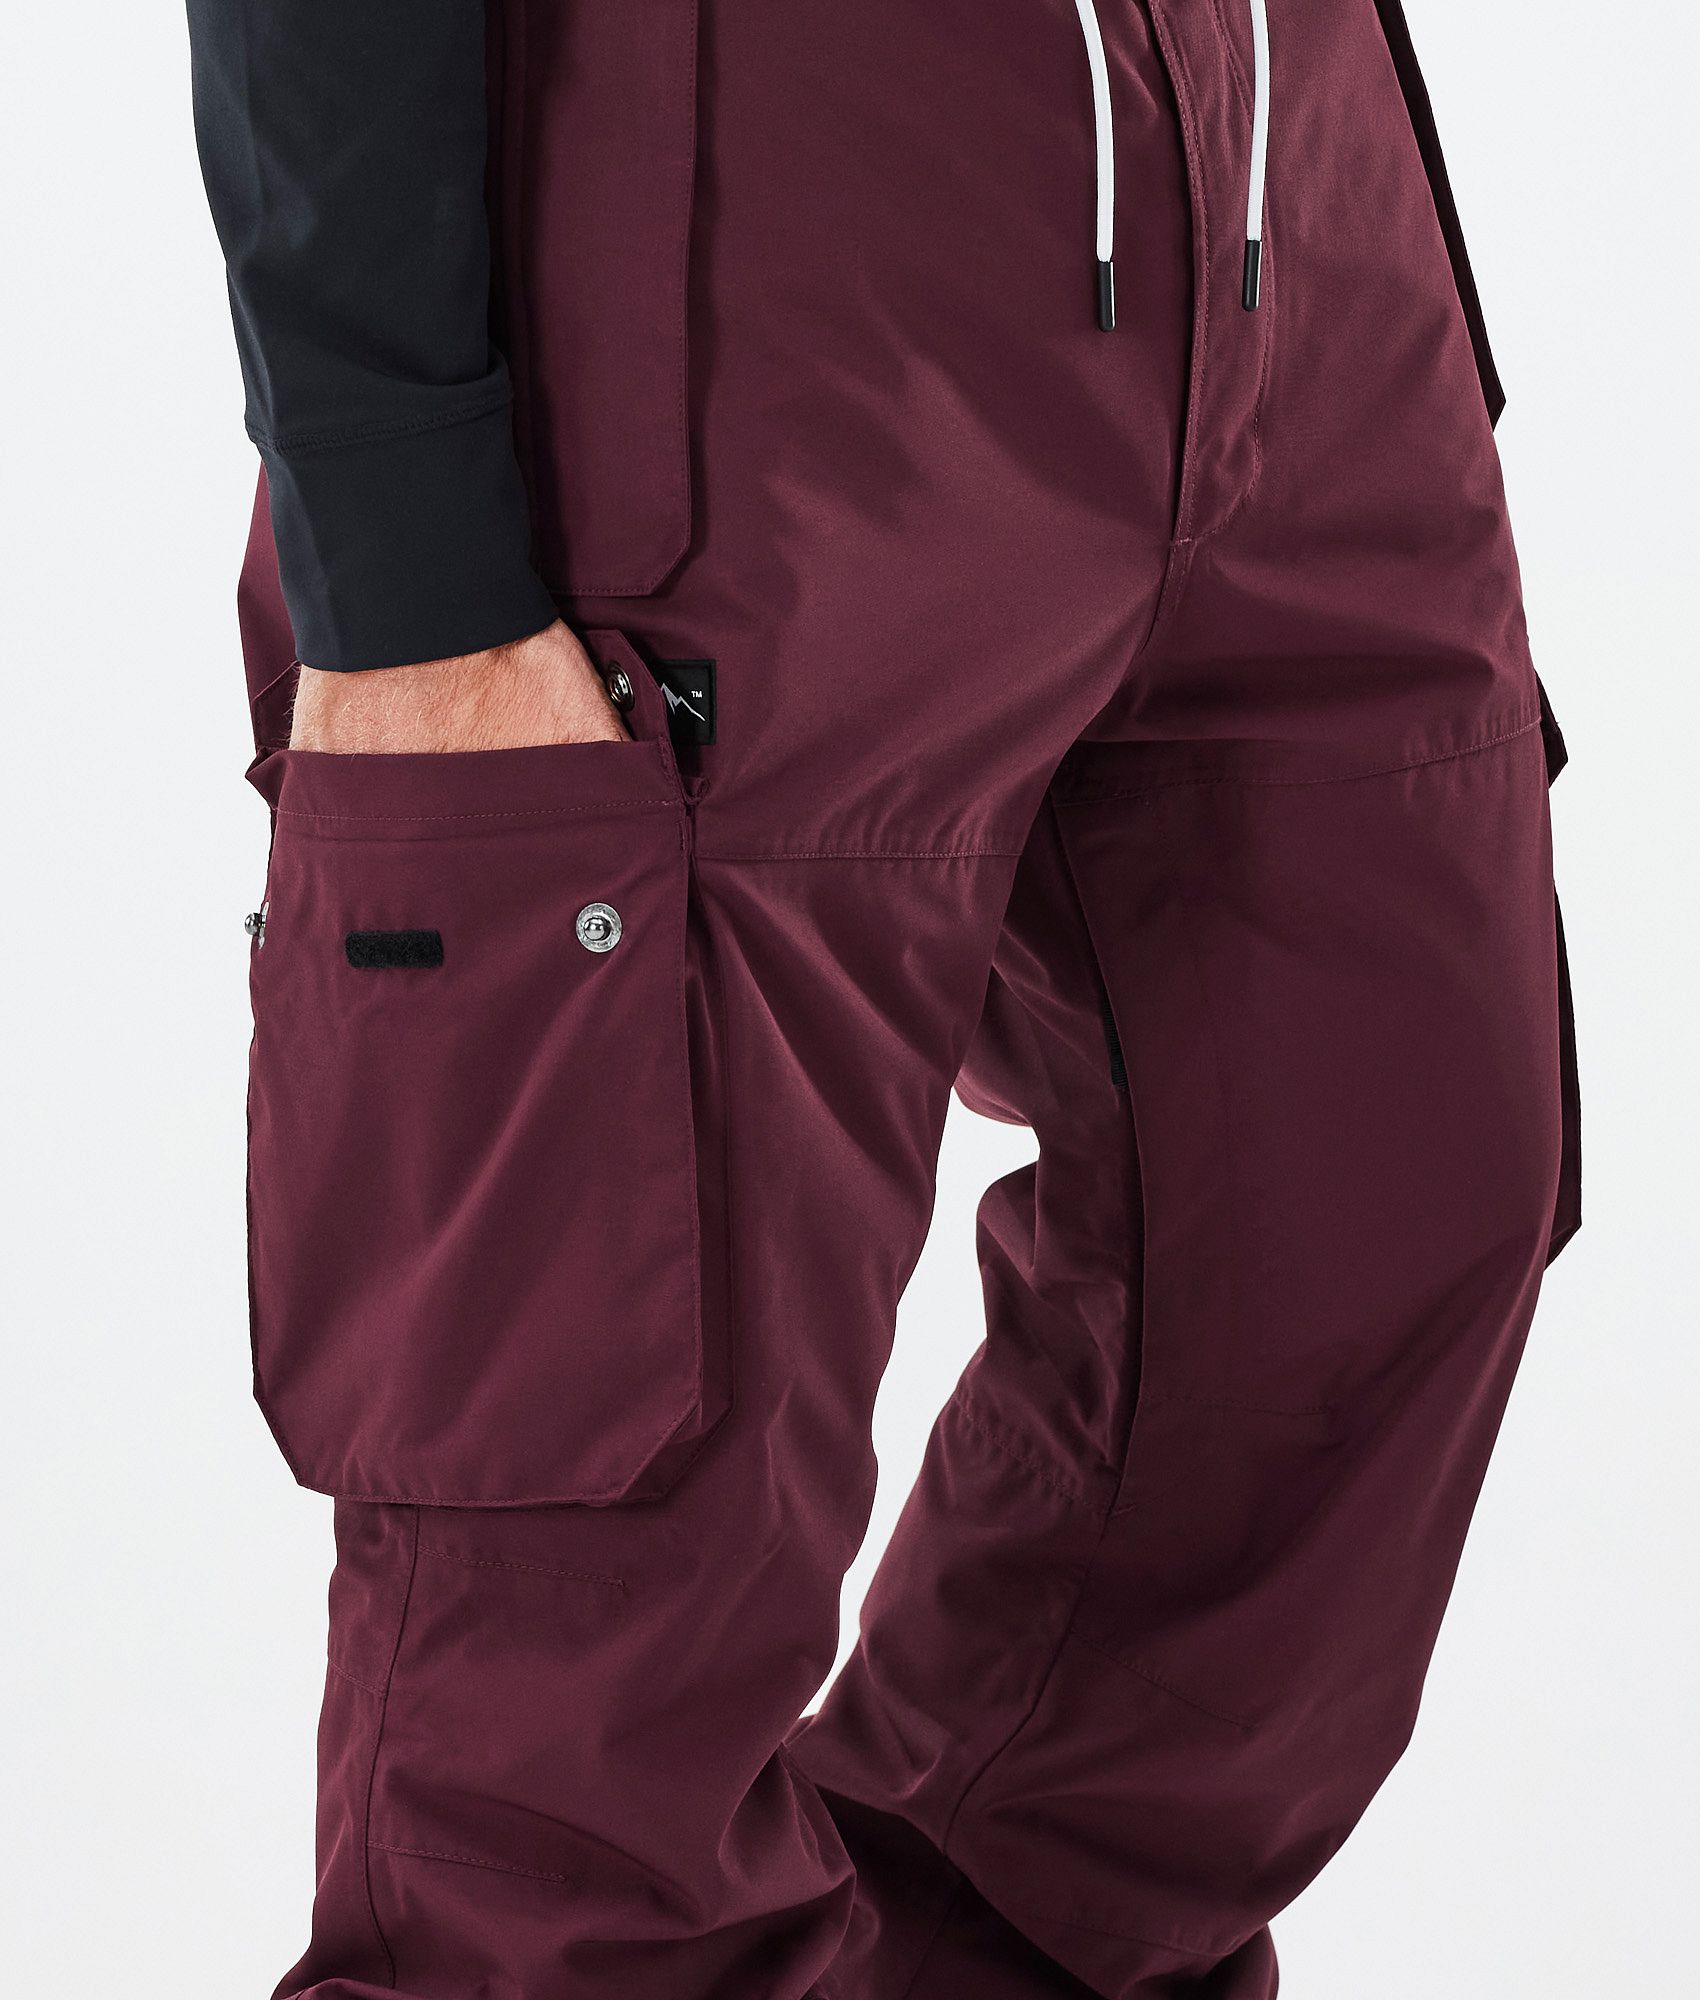 ZNA Toko Jogger/Cargo Pants (Lycra) | Color- Maroon | Size- Large :  Amazon.in: Clothing & Accessories